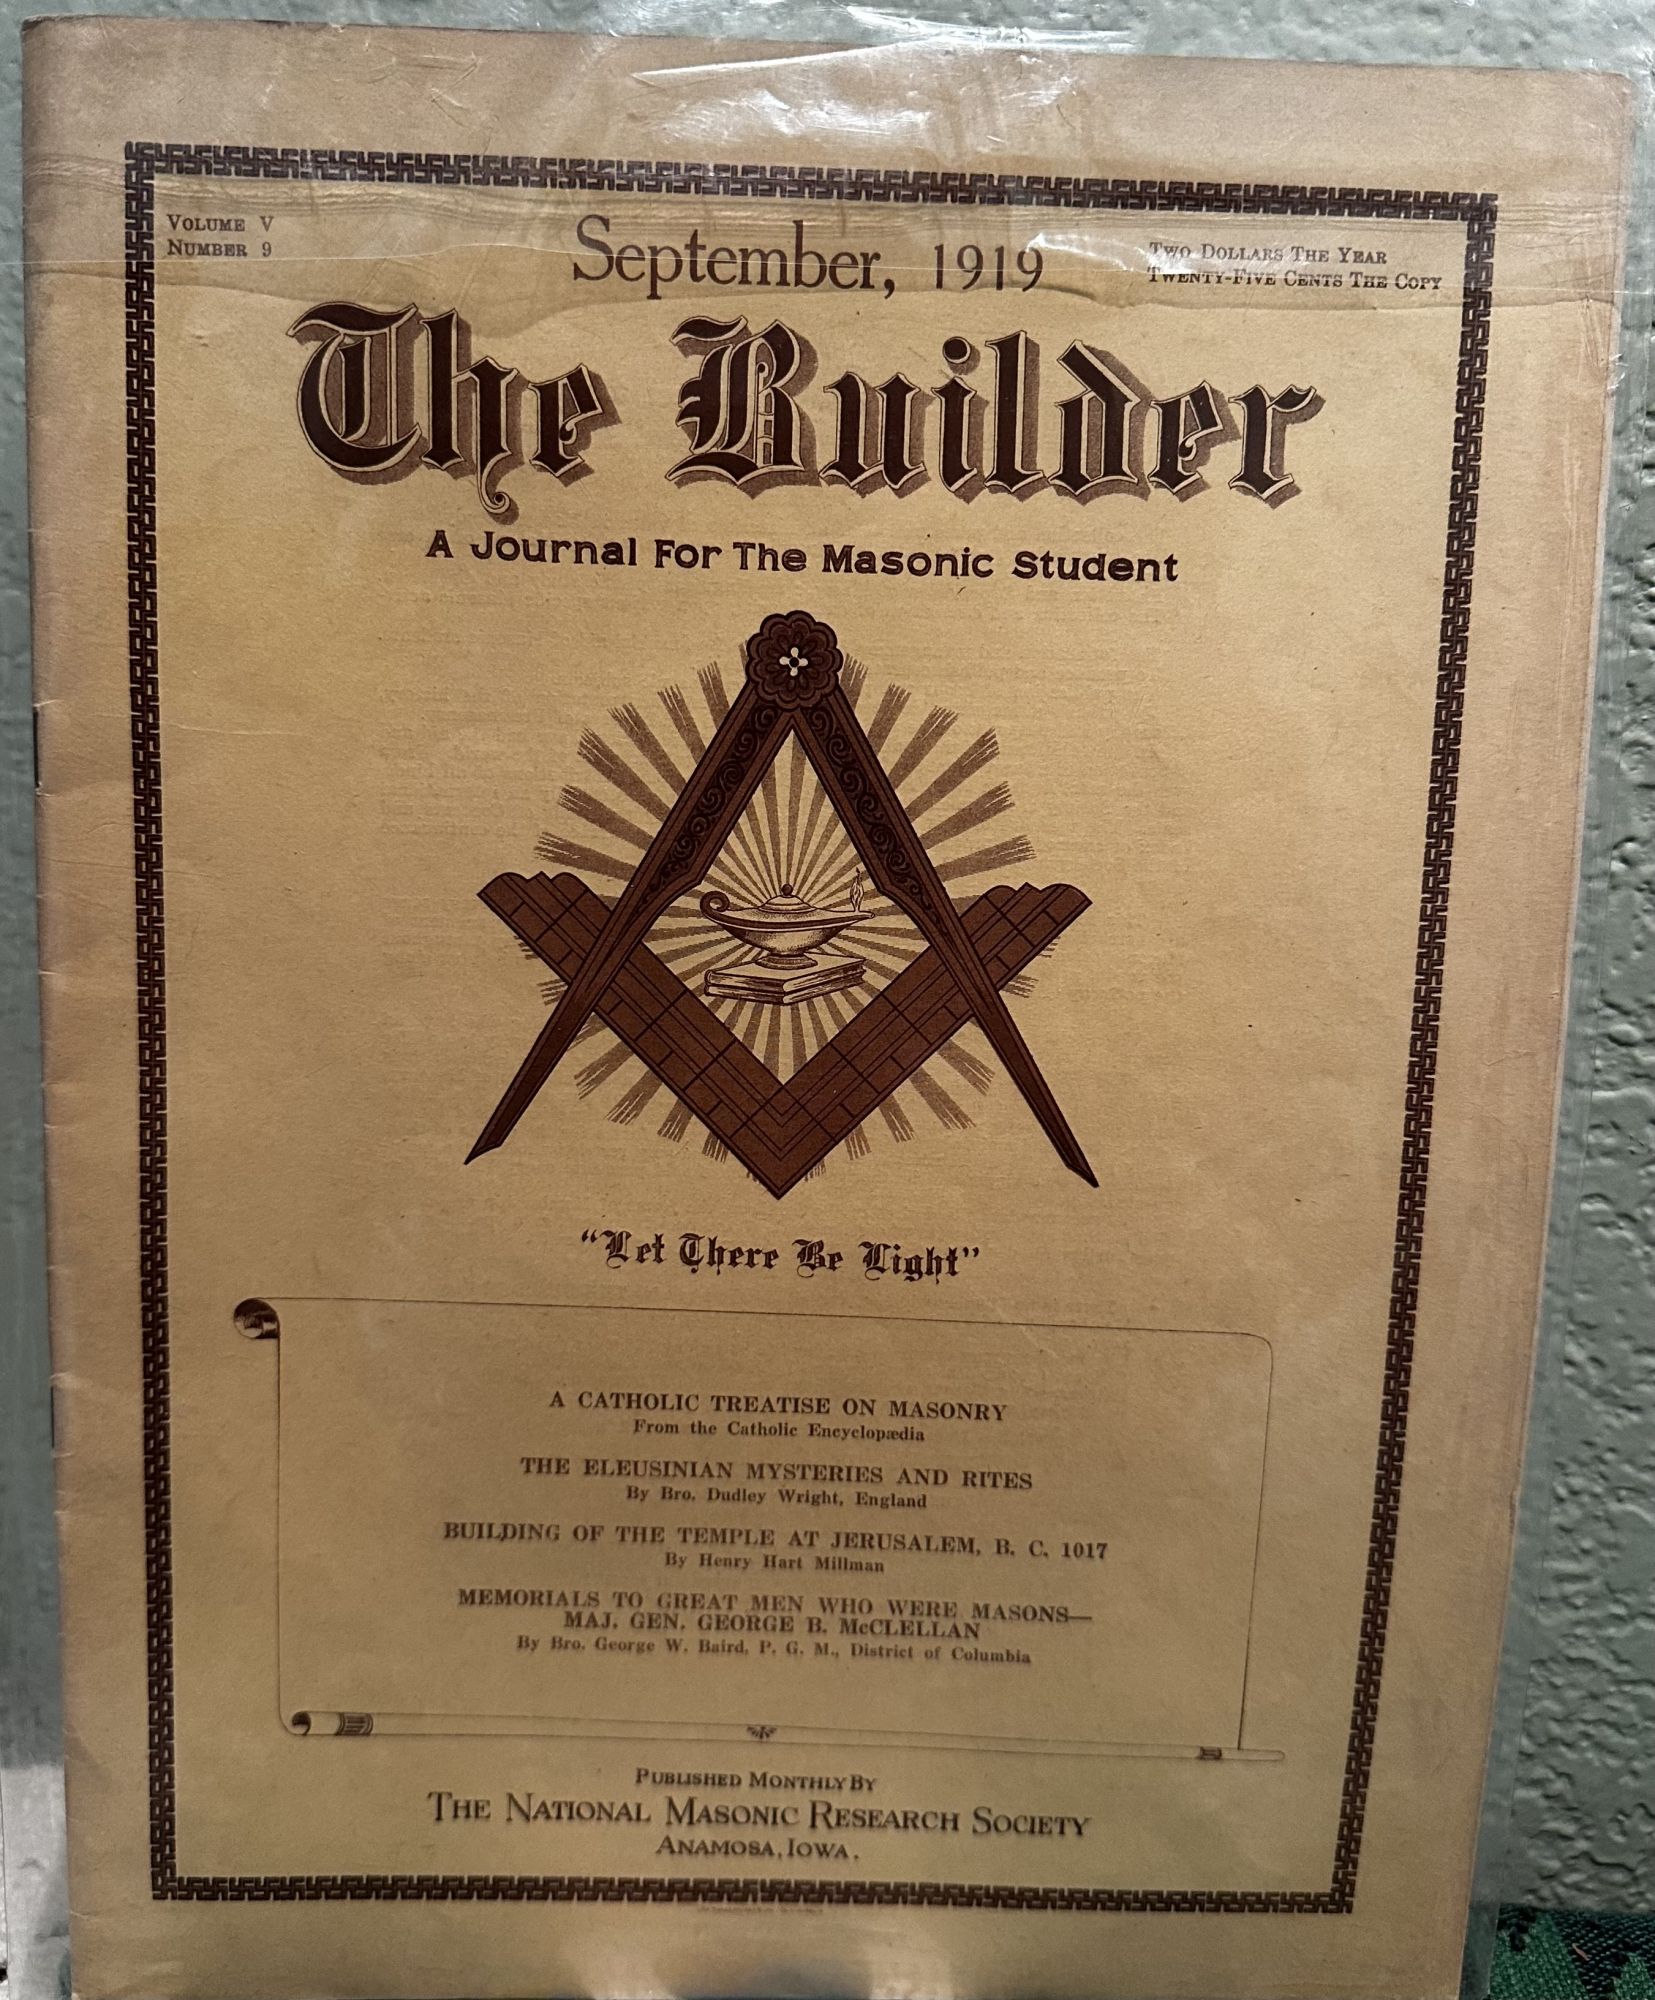 The Builder; A Journal for the Masonic Student Vol V No 9 September 1919. The National Masonic Research Society.